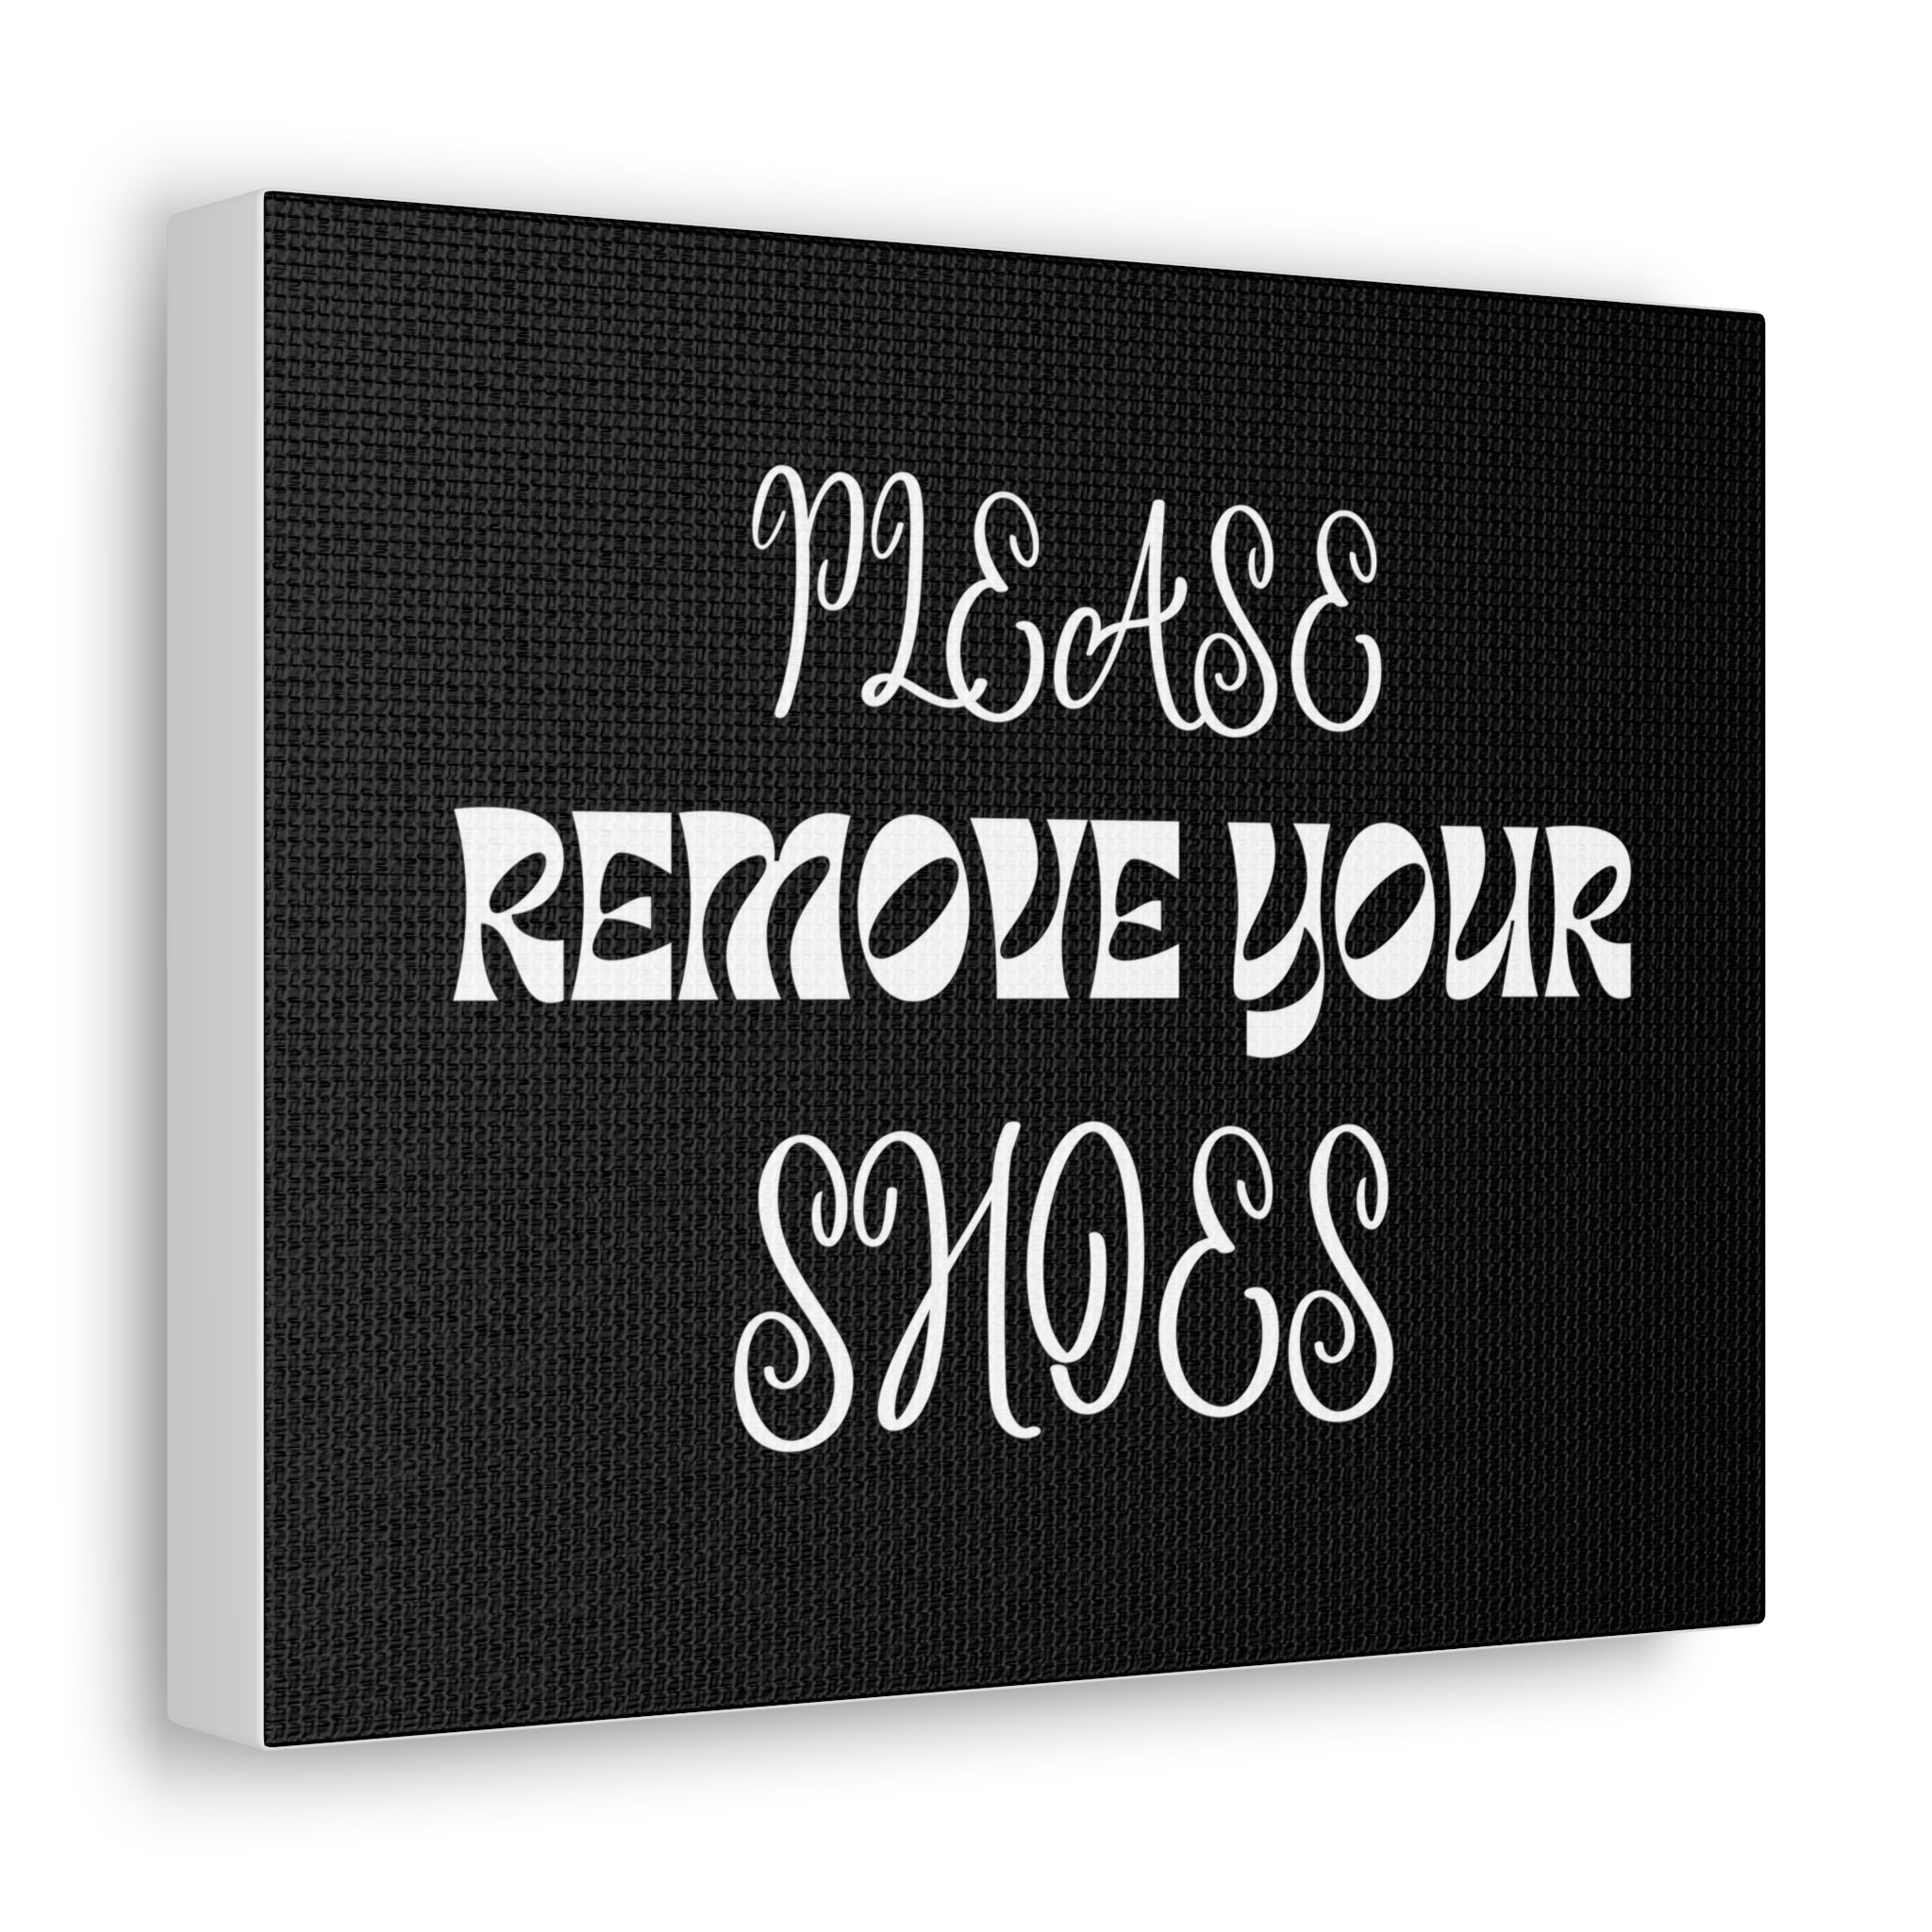 Please Remove Your Shoes 10" x 8" Canvas Gallery Wraps (If you'd like another color or saying please just let me know)